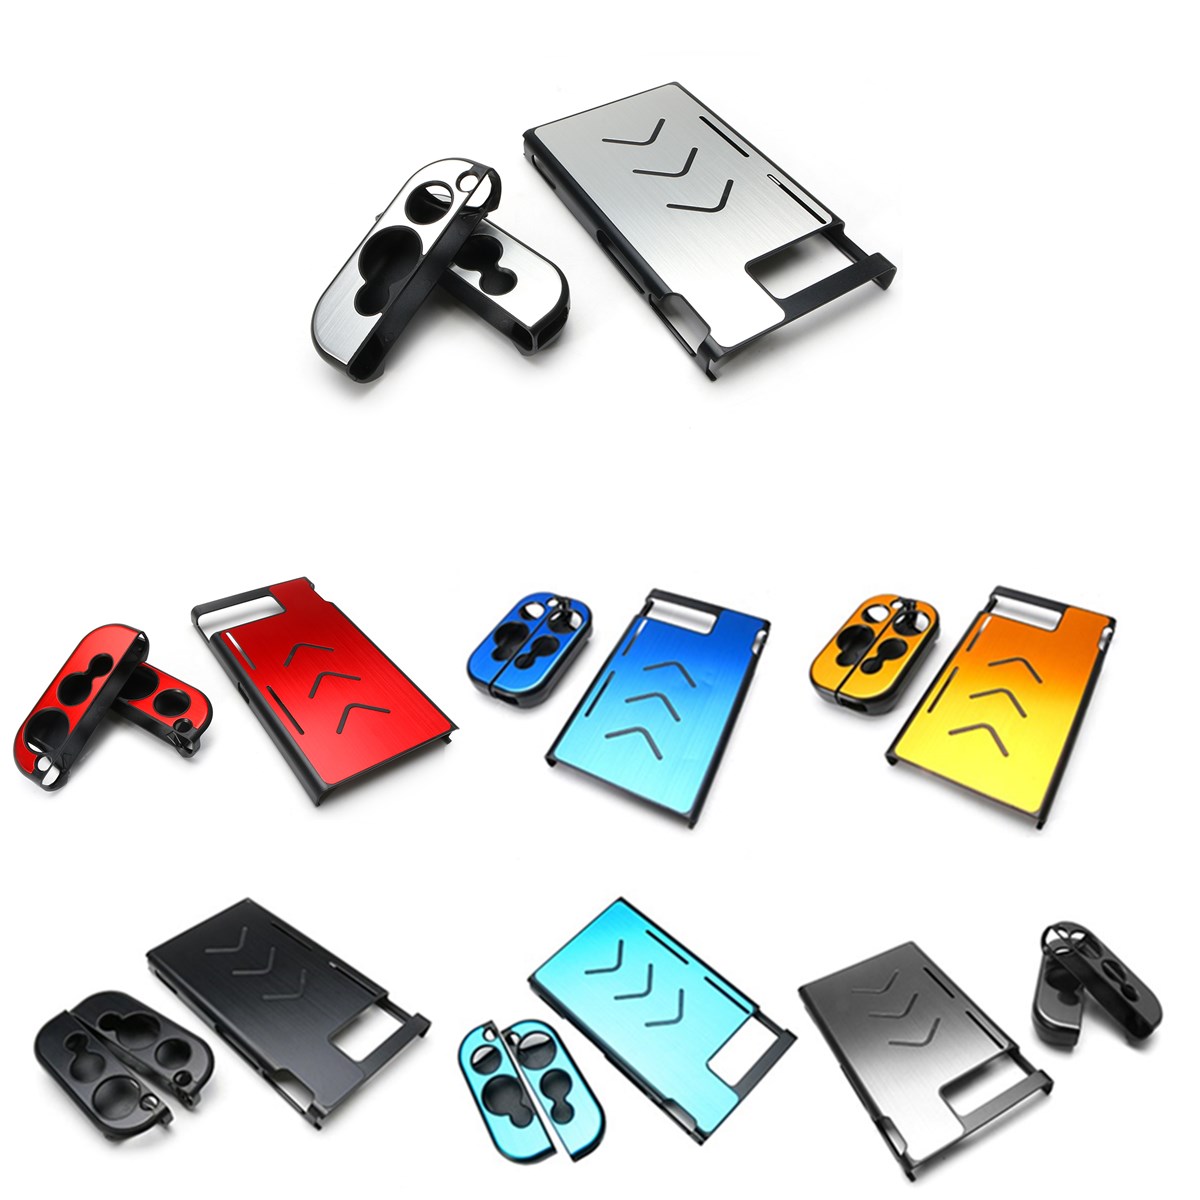 Replacement Accessories Housing Shell Case Protective For Nintendo Switch Controller Joy-con 18